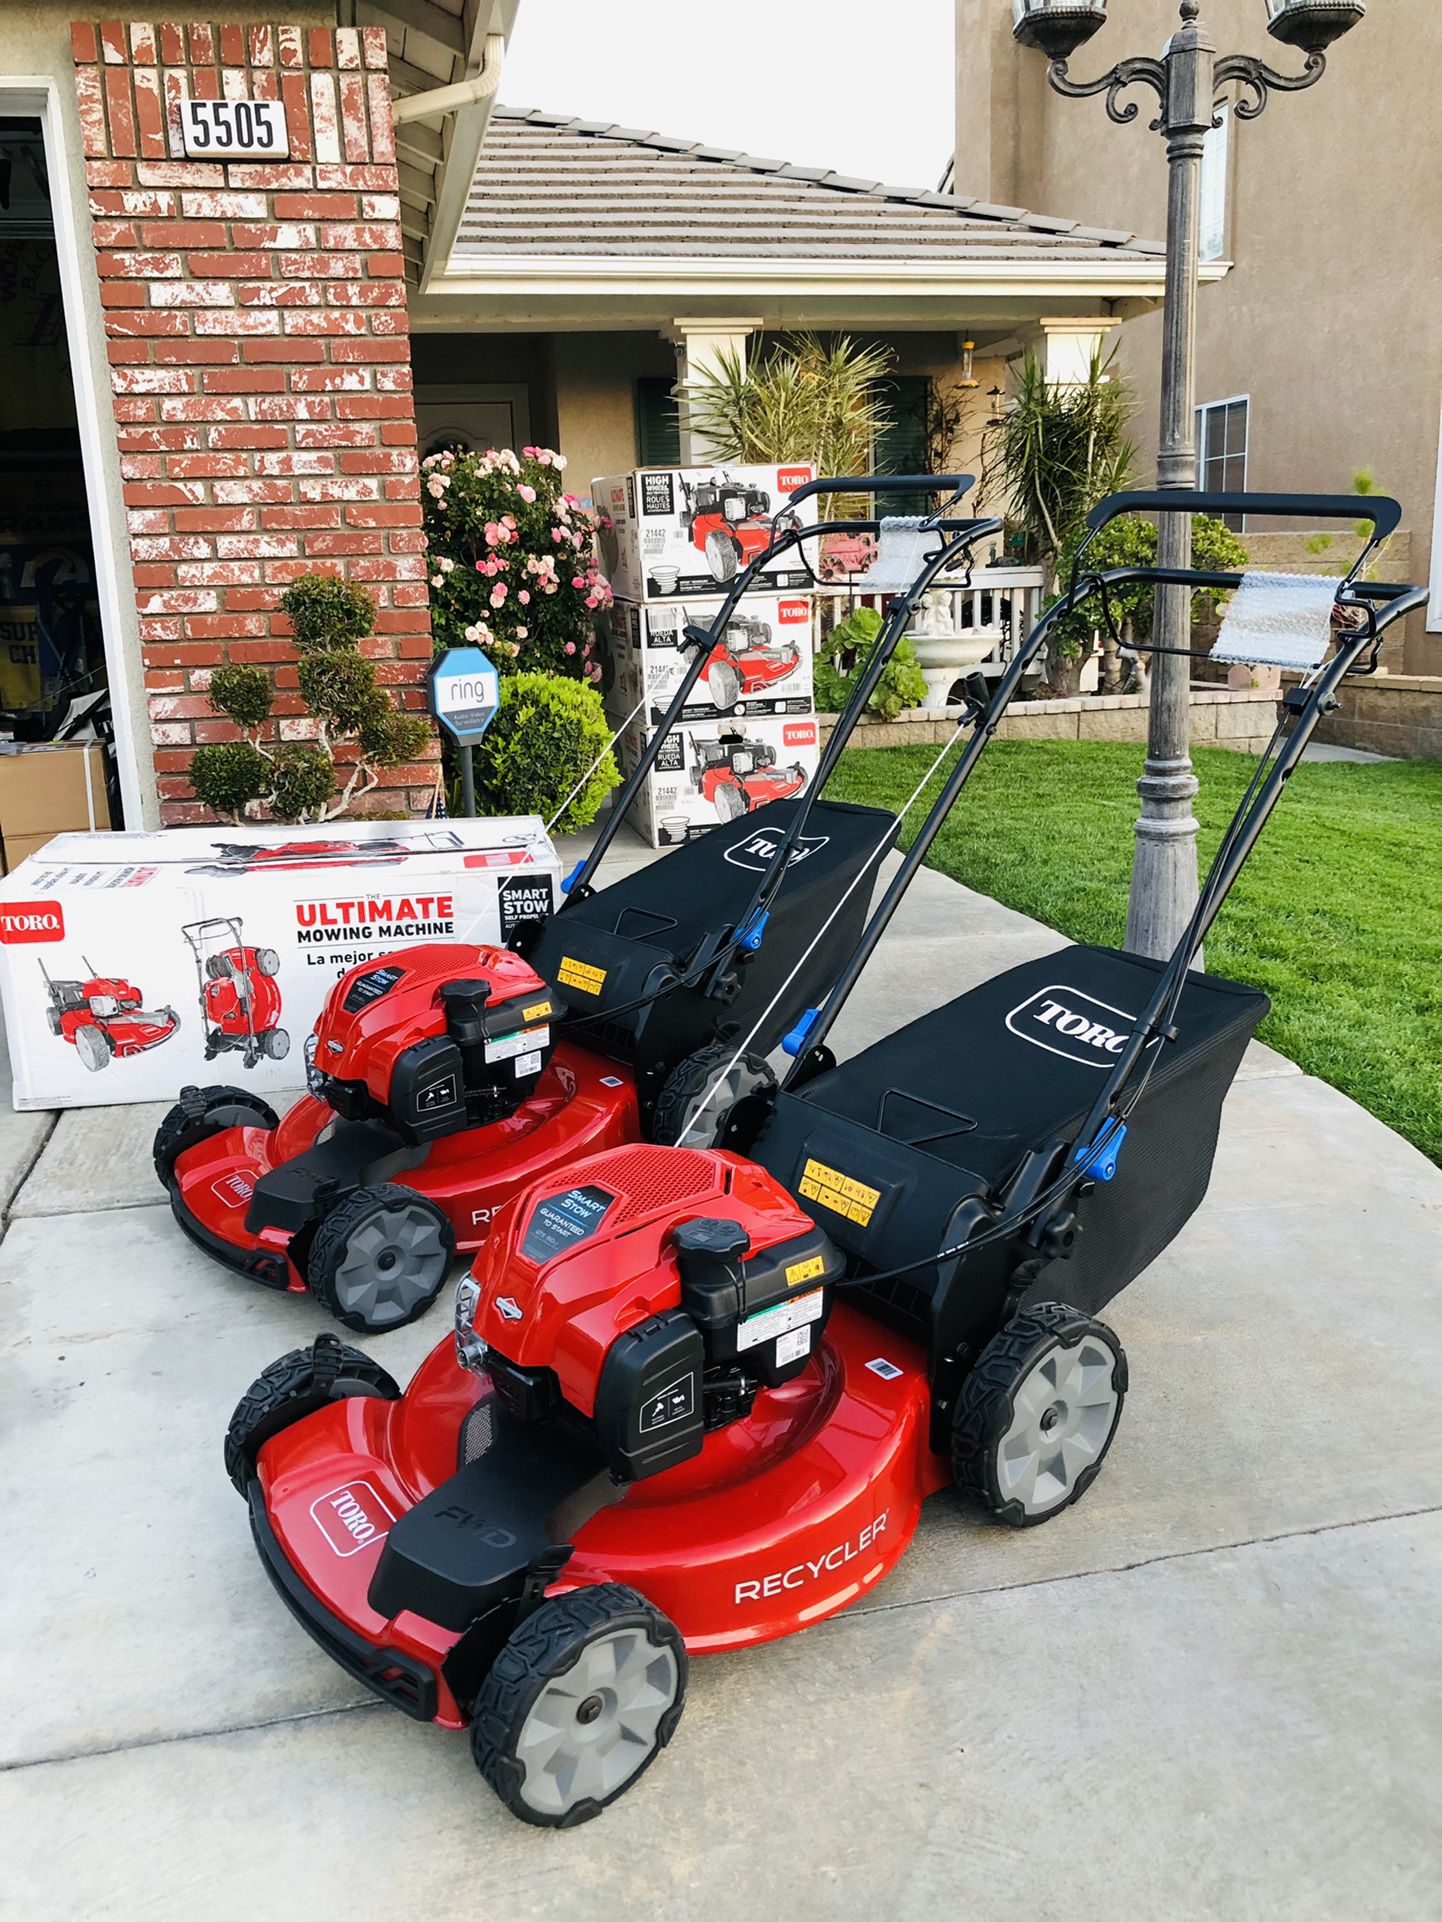 sap verklaren Pardon LIKE NEW !! FULLY ASSEMBLED AND COMPLETE READY TO GO OUT THE BOX.! TORO 22”  SELF PROPELLED VORTEX FRONT WHEEL DRIVE SMARTSTOW RECYCLER MOWERS! for Sale  in Fontana, CA - OfferUp